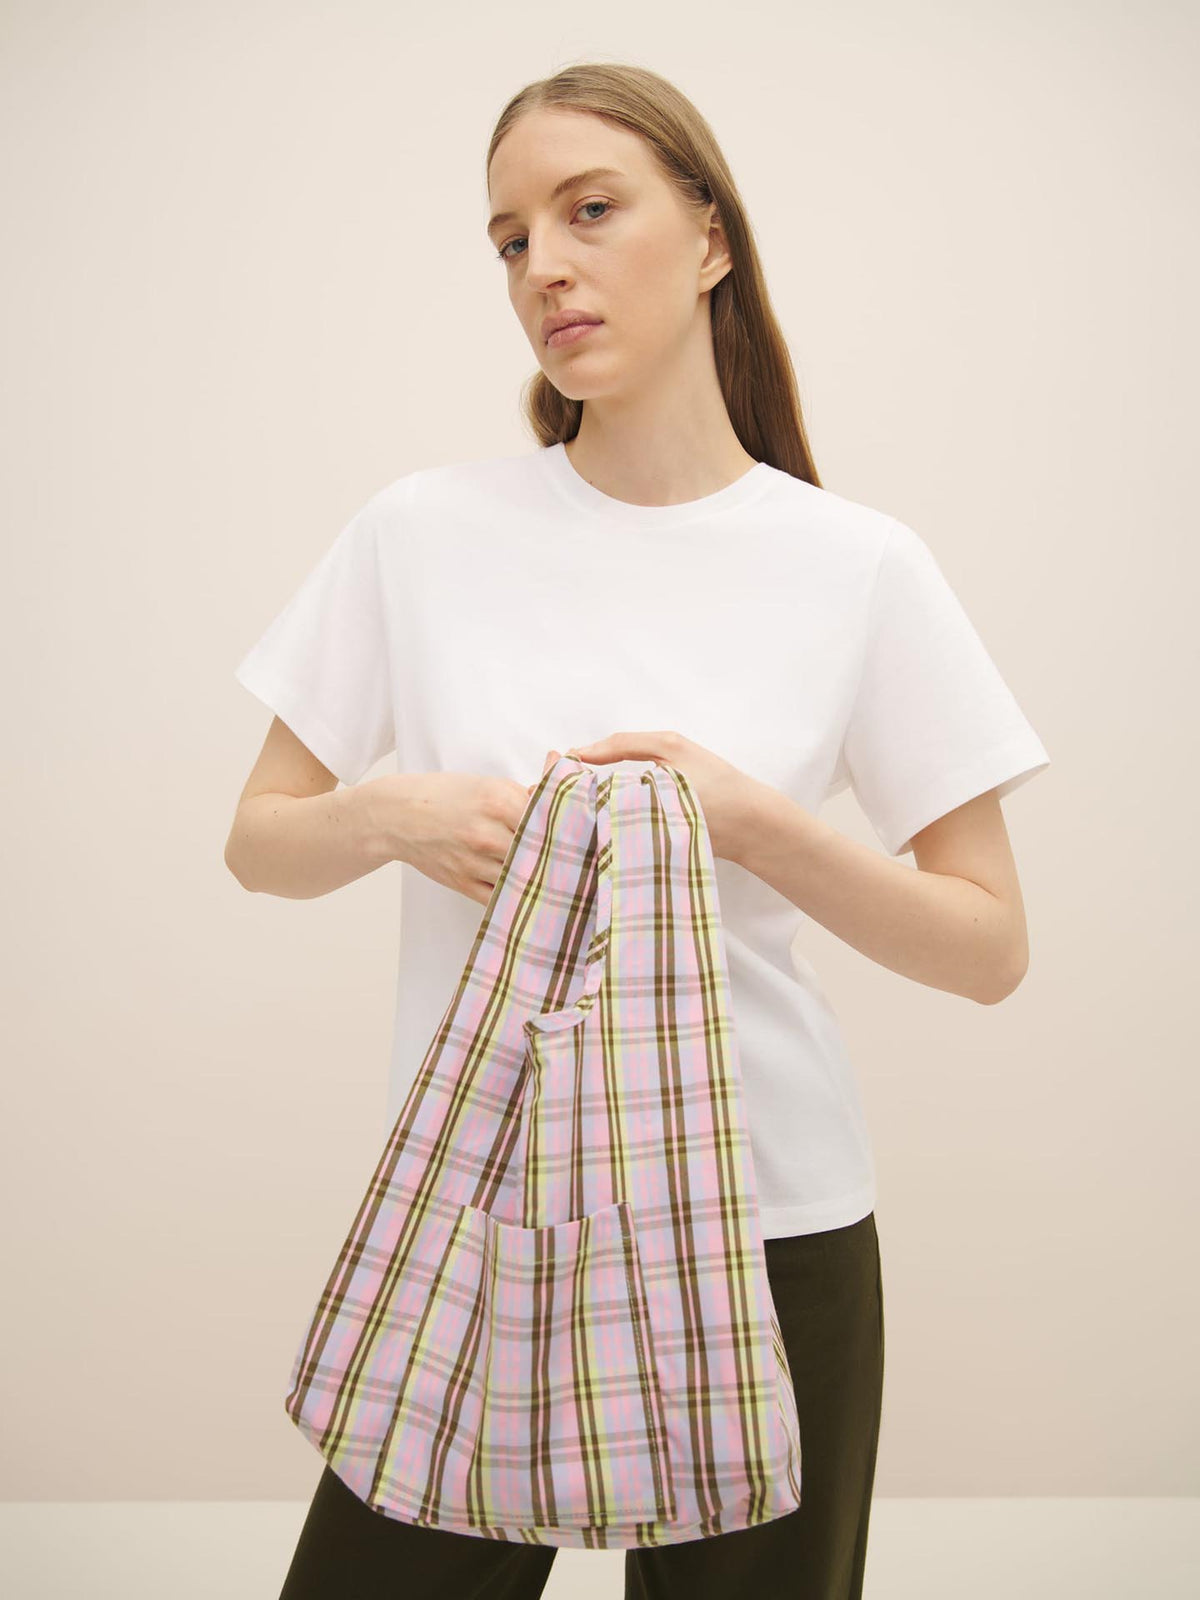 Woman holding a Kowtow Mini Market Bag in Pink Tartan and wearing a white t-shirt.